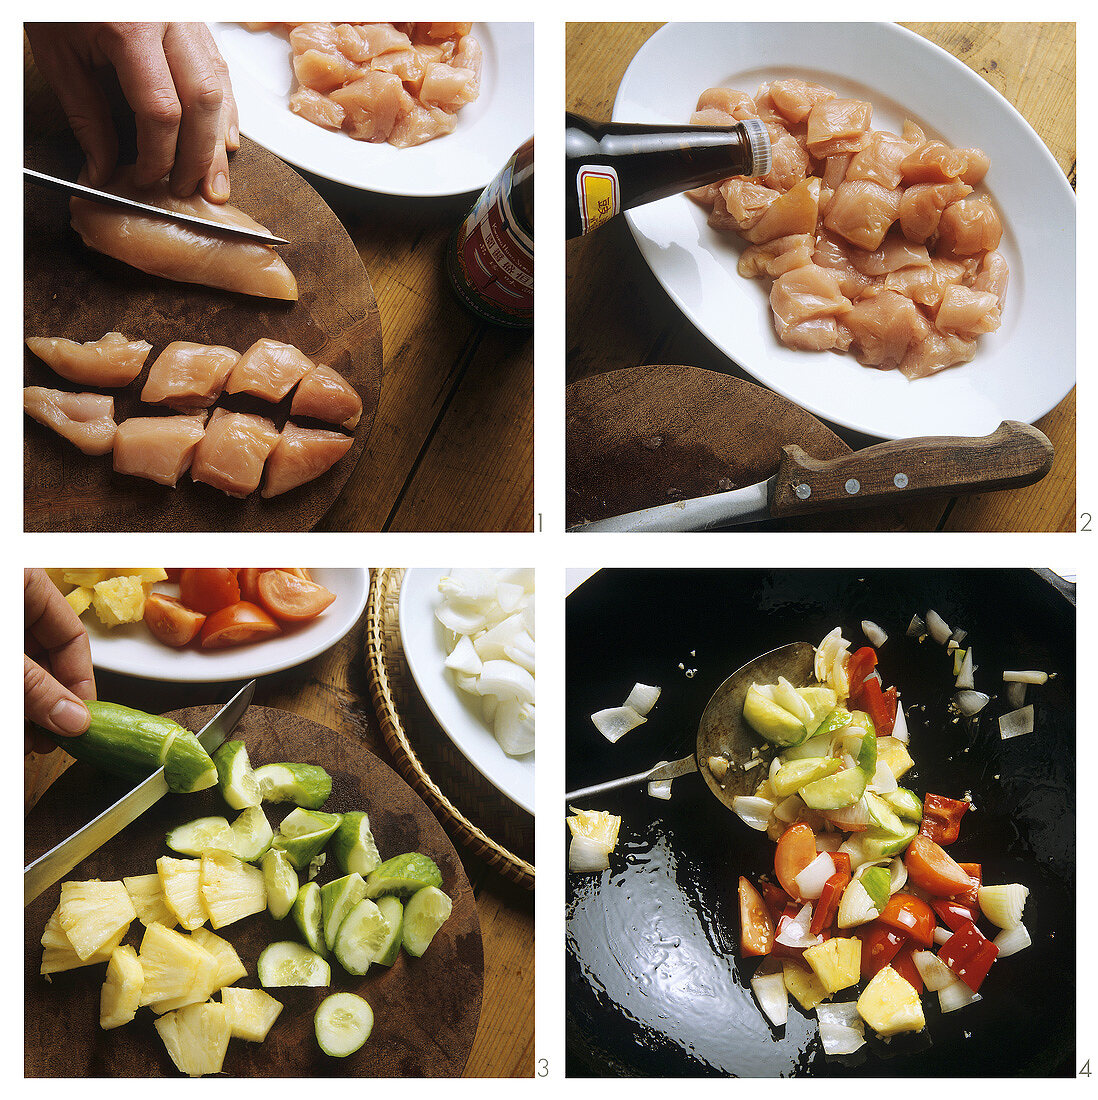 Preparing sweet and sour chicken breast